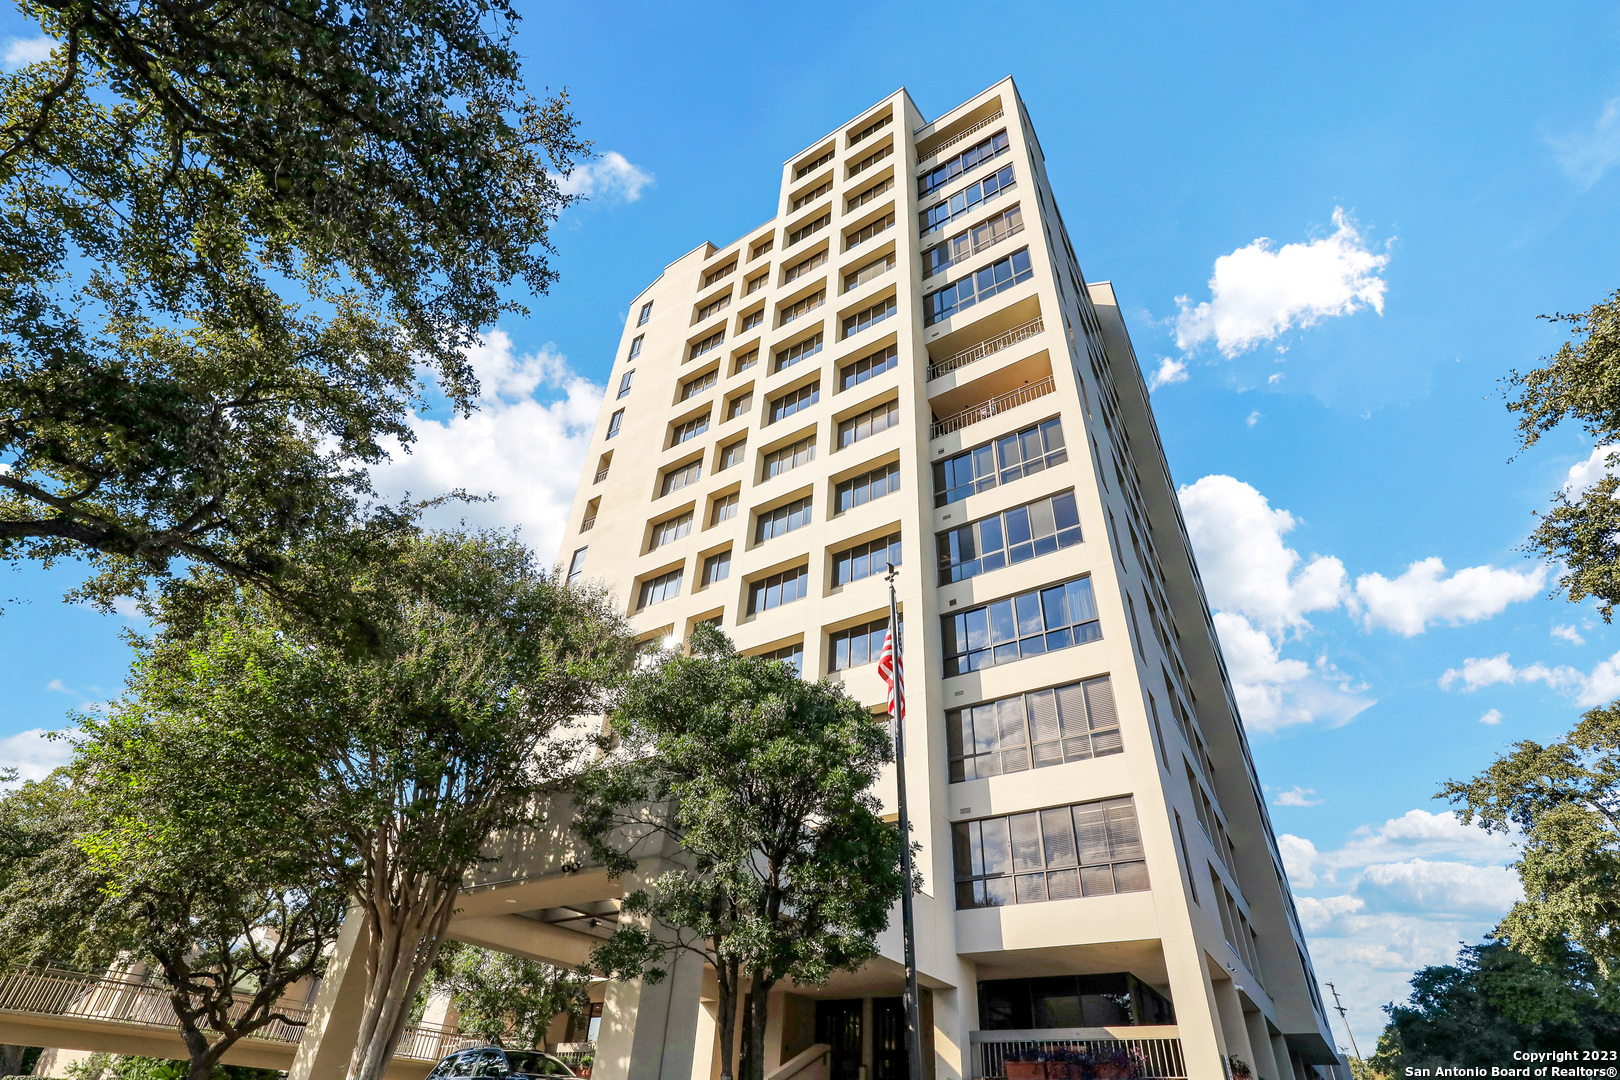 Take in the San Antonio skyline with expansive views in this updated high-rise condominium. Enjoy a spacious layout in this corner unit with spectacular views of downtown San Antonio, the San Antonio Country Club, and the University of Incarnate Word. This lock and leave condo is move-in ready with two bedrooms, two bathrooms, and updated kitchen with stainless steel appliances. Amenities include concierge service, 24/7 security, fitness room, pool, and two reserved parking spaces.